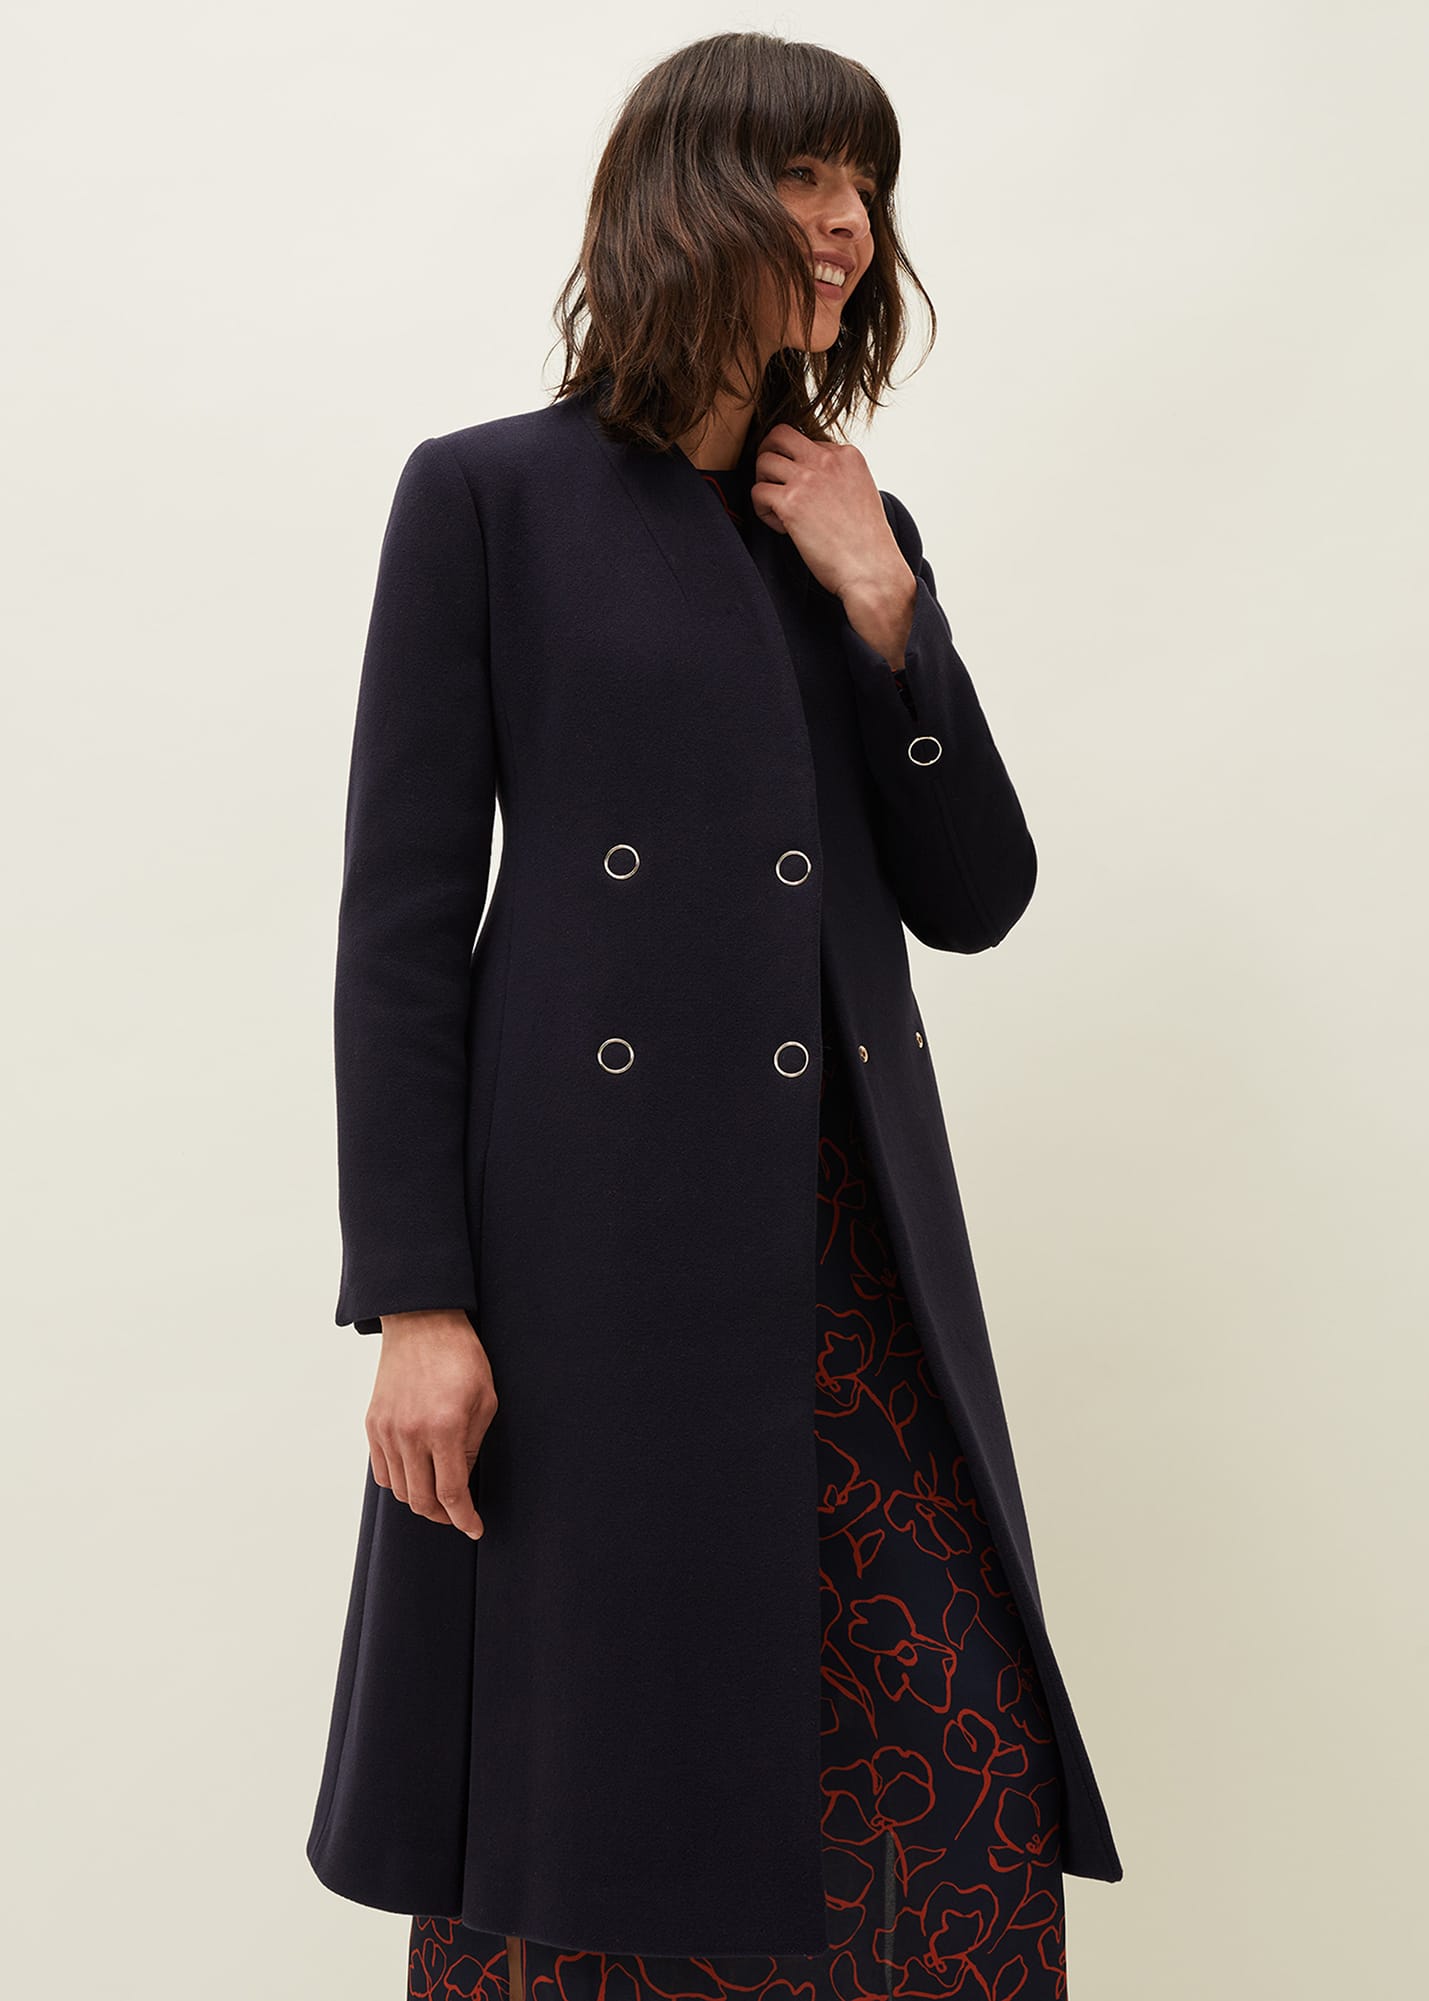 Phase Eight Women's Evie-Rose Fit & Flare Wool Coat